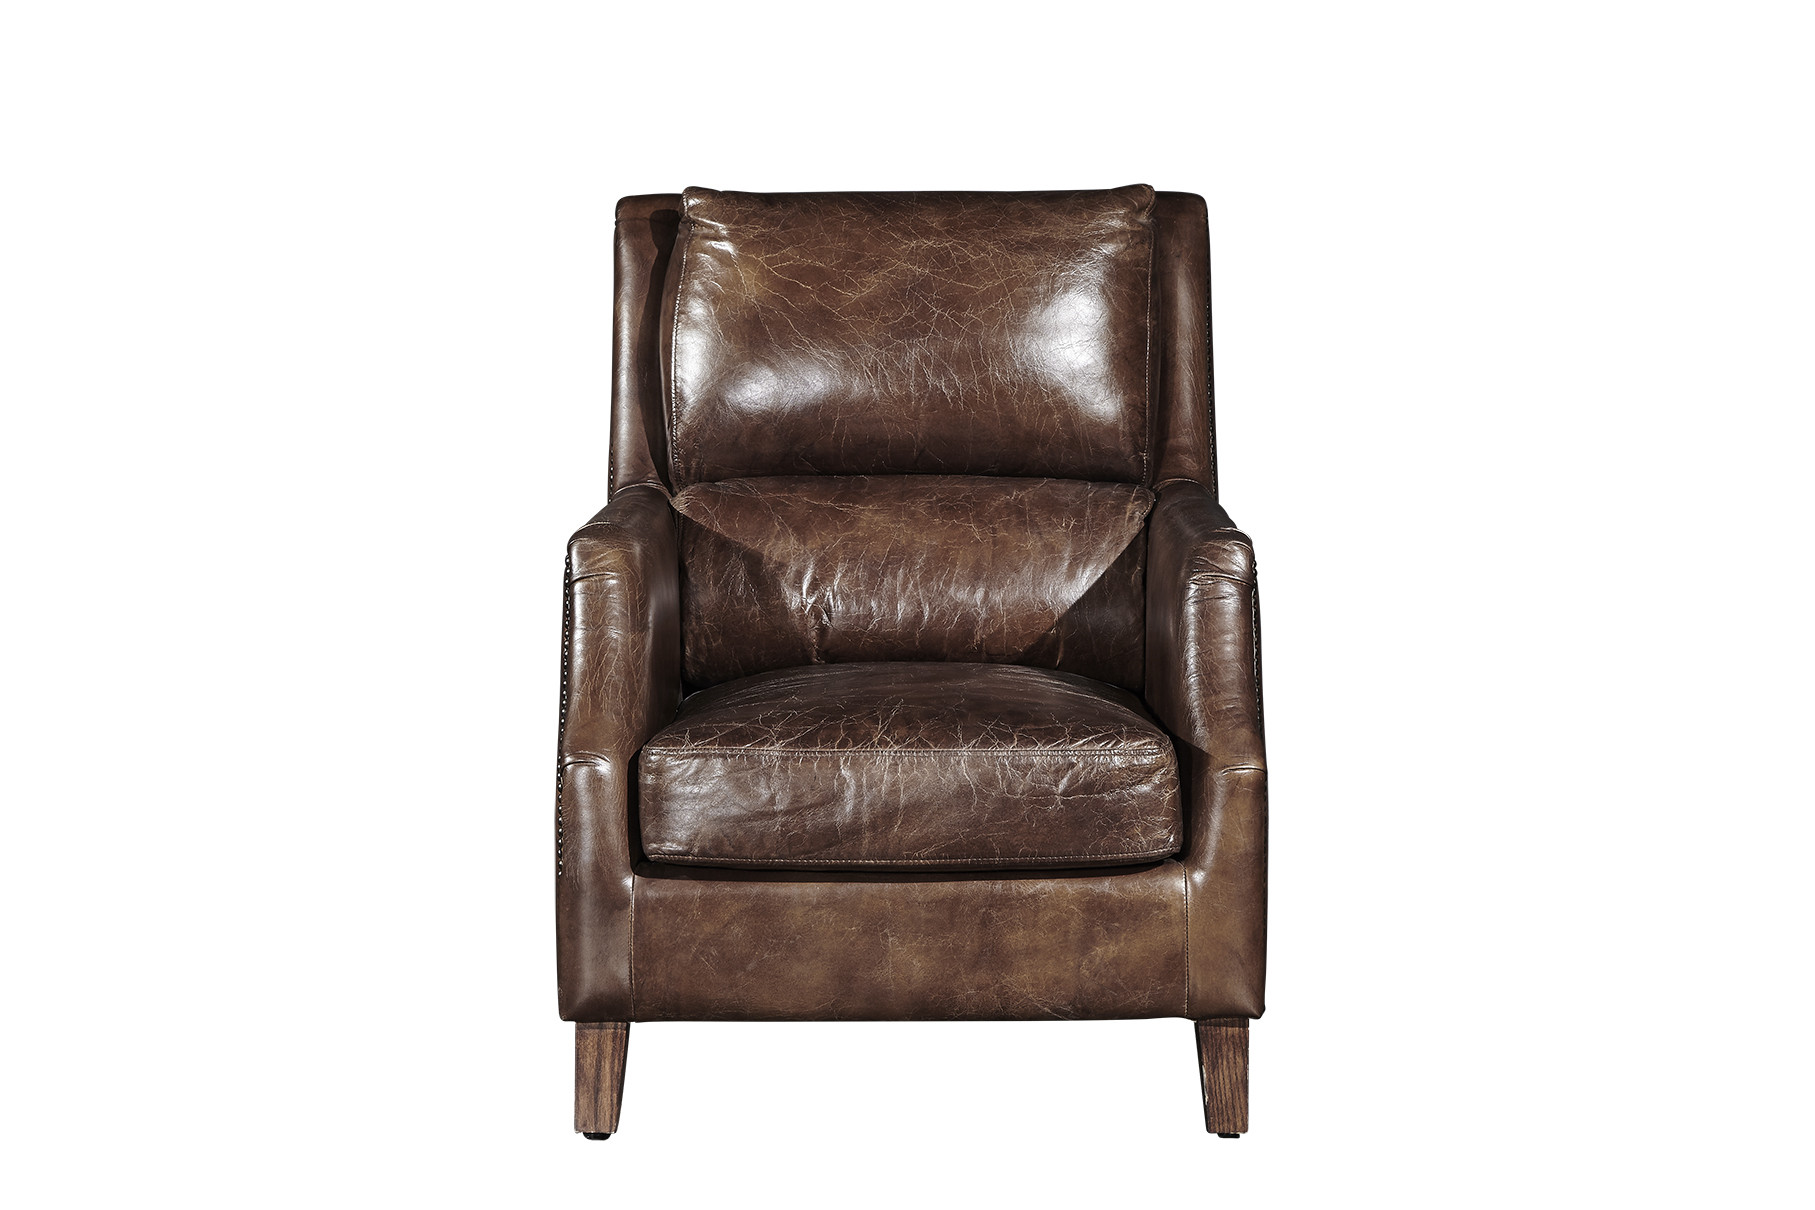 Industrial Retro Vintage Cigar High Back Leather Armchair With Solid Wood Legs